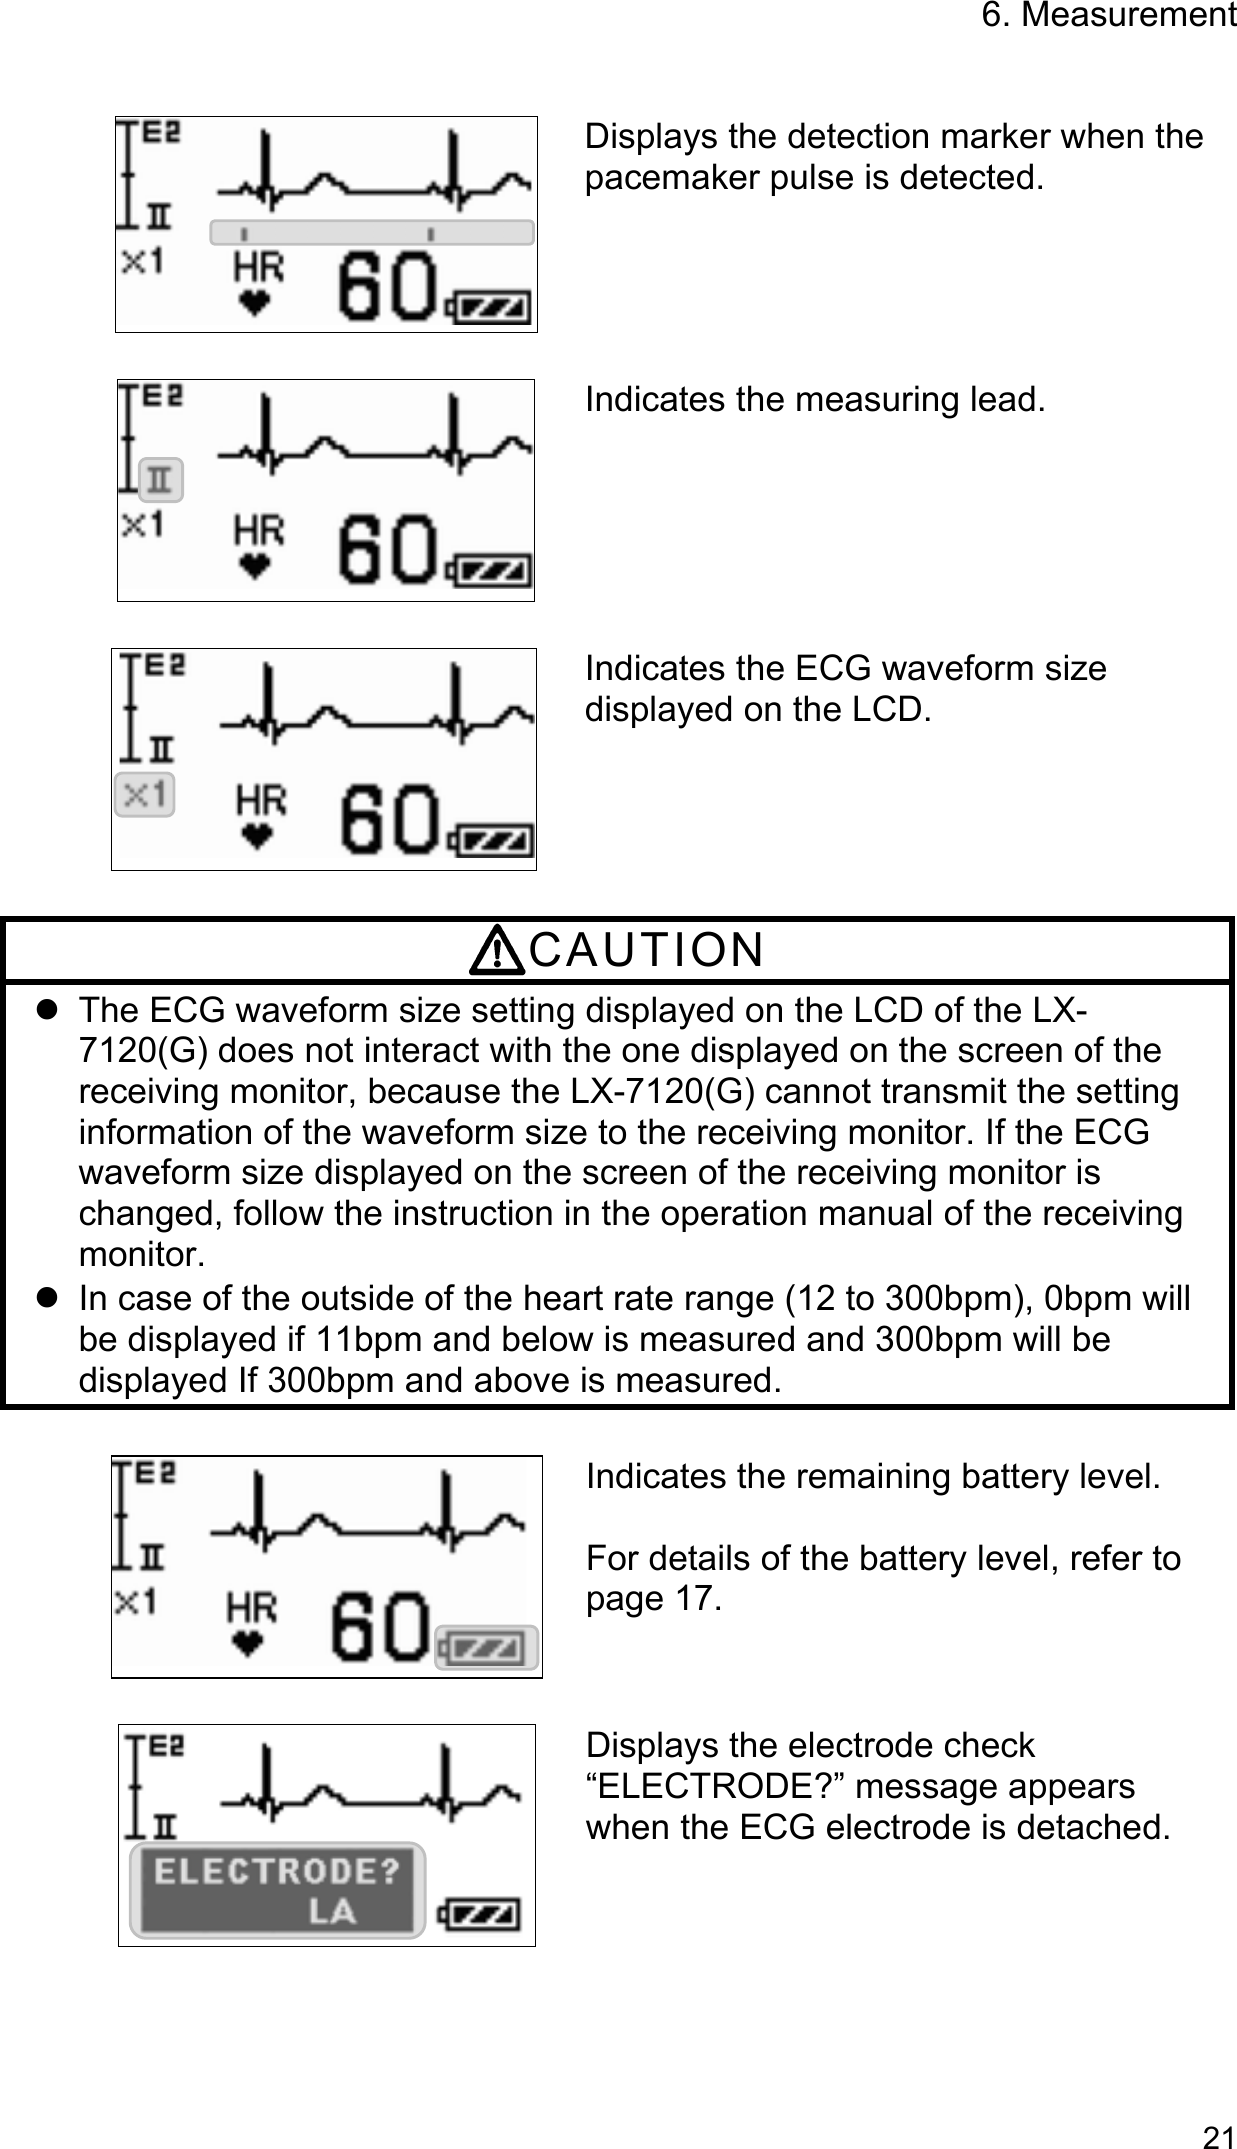 6. Measurement   21     Displays the detection marker when the pacemaker pulse is detected. Indicates the measuring lead.   Indicates the ECG waveform size displayed on the LCD.  CAUTION   The ECG waveform size setting displayed on the LCD of the LX-7120(G) does not interact with the one displayed on the screen of the receiving monitor, because the LX-7120(G) cannot transmit the setting information of the waveform size to the receiving monitor. If the ECG waveform size displayed on the screen of the receiving monitor is changed, follow the instruction in the operation manual of the receiving monitor.   In case of the outside of the heart rate range (12 to 300bpm), 0bpm will be displayed if 11bpm and below is measured and 300bpm will be displayed If 300bpm and above is measured.  Indicates the remaining battery level.  For details of the battery level, refer to page 17.   Displays the electrode check “ELECTRODE?” message appears when the ECG electrode is detached.